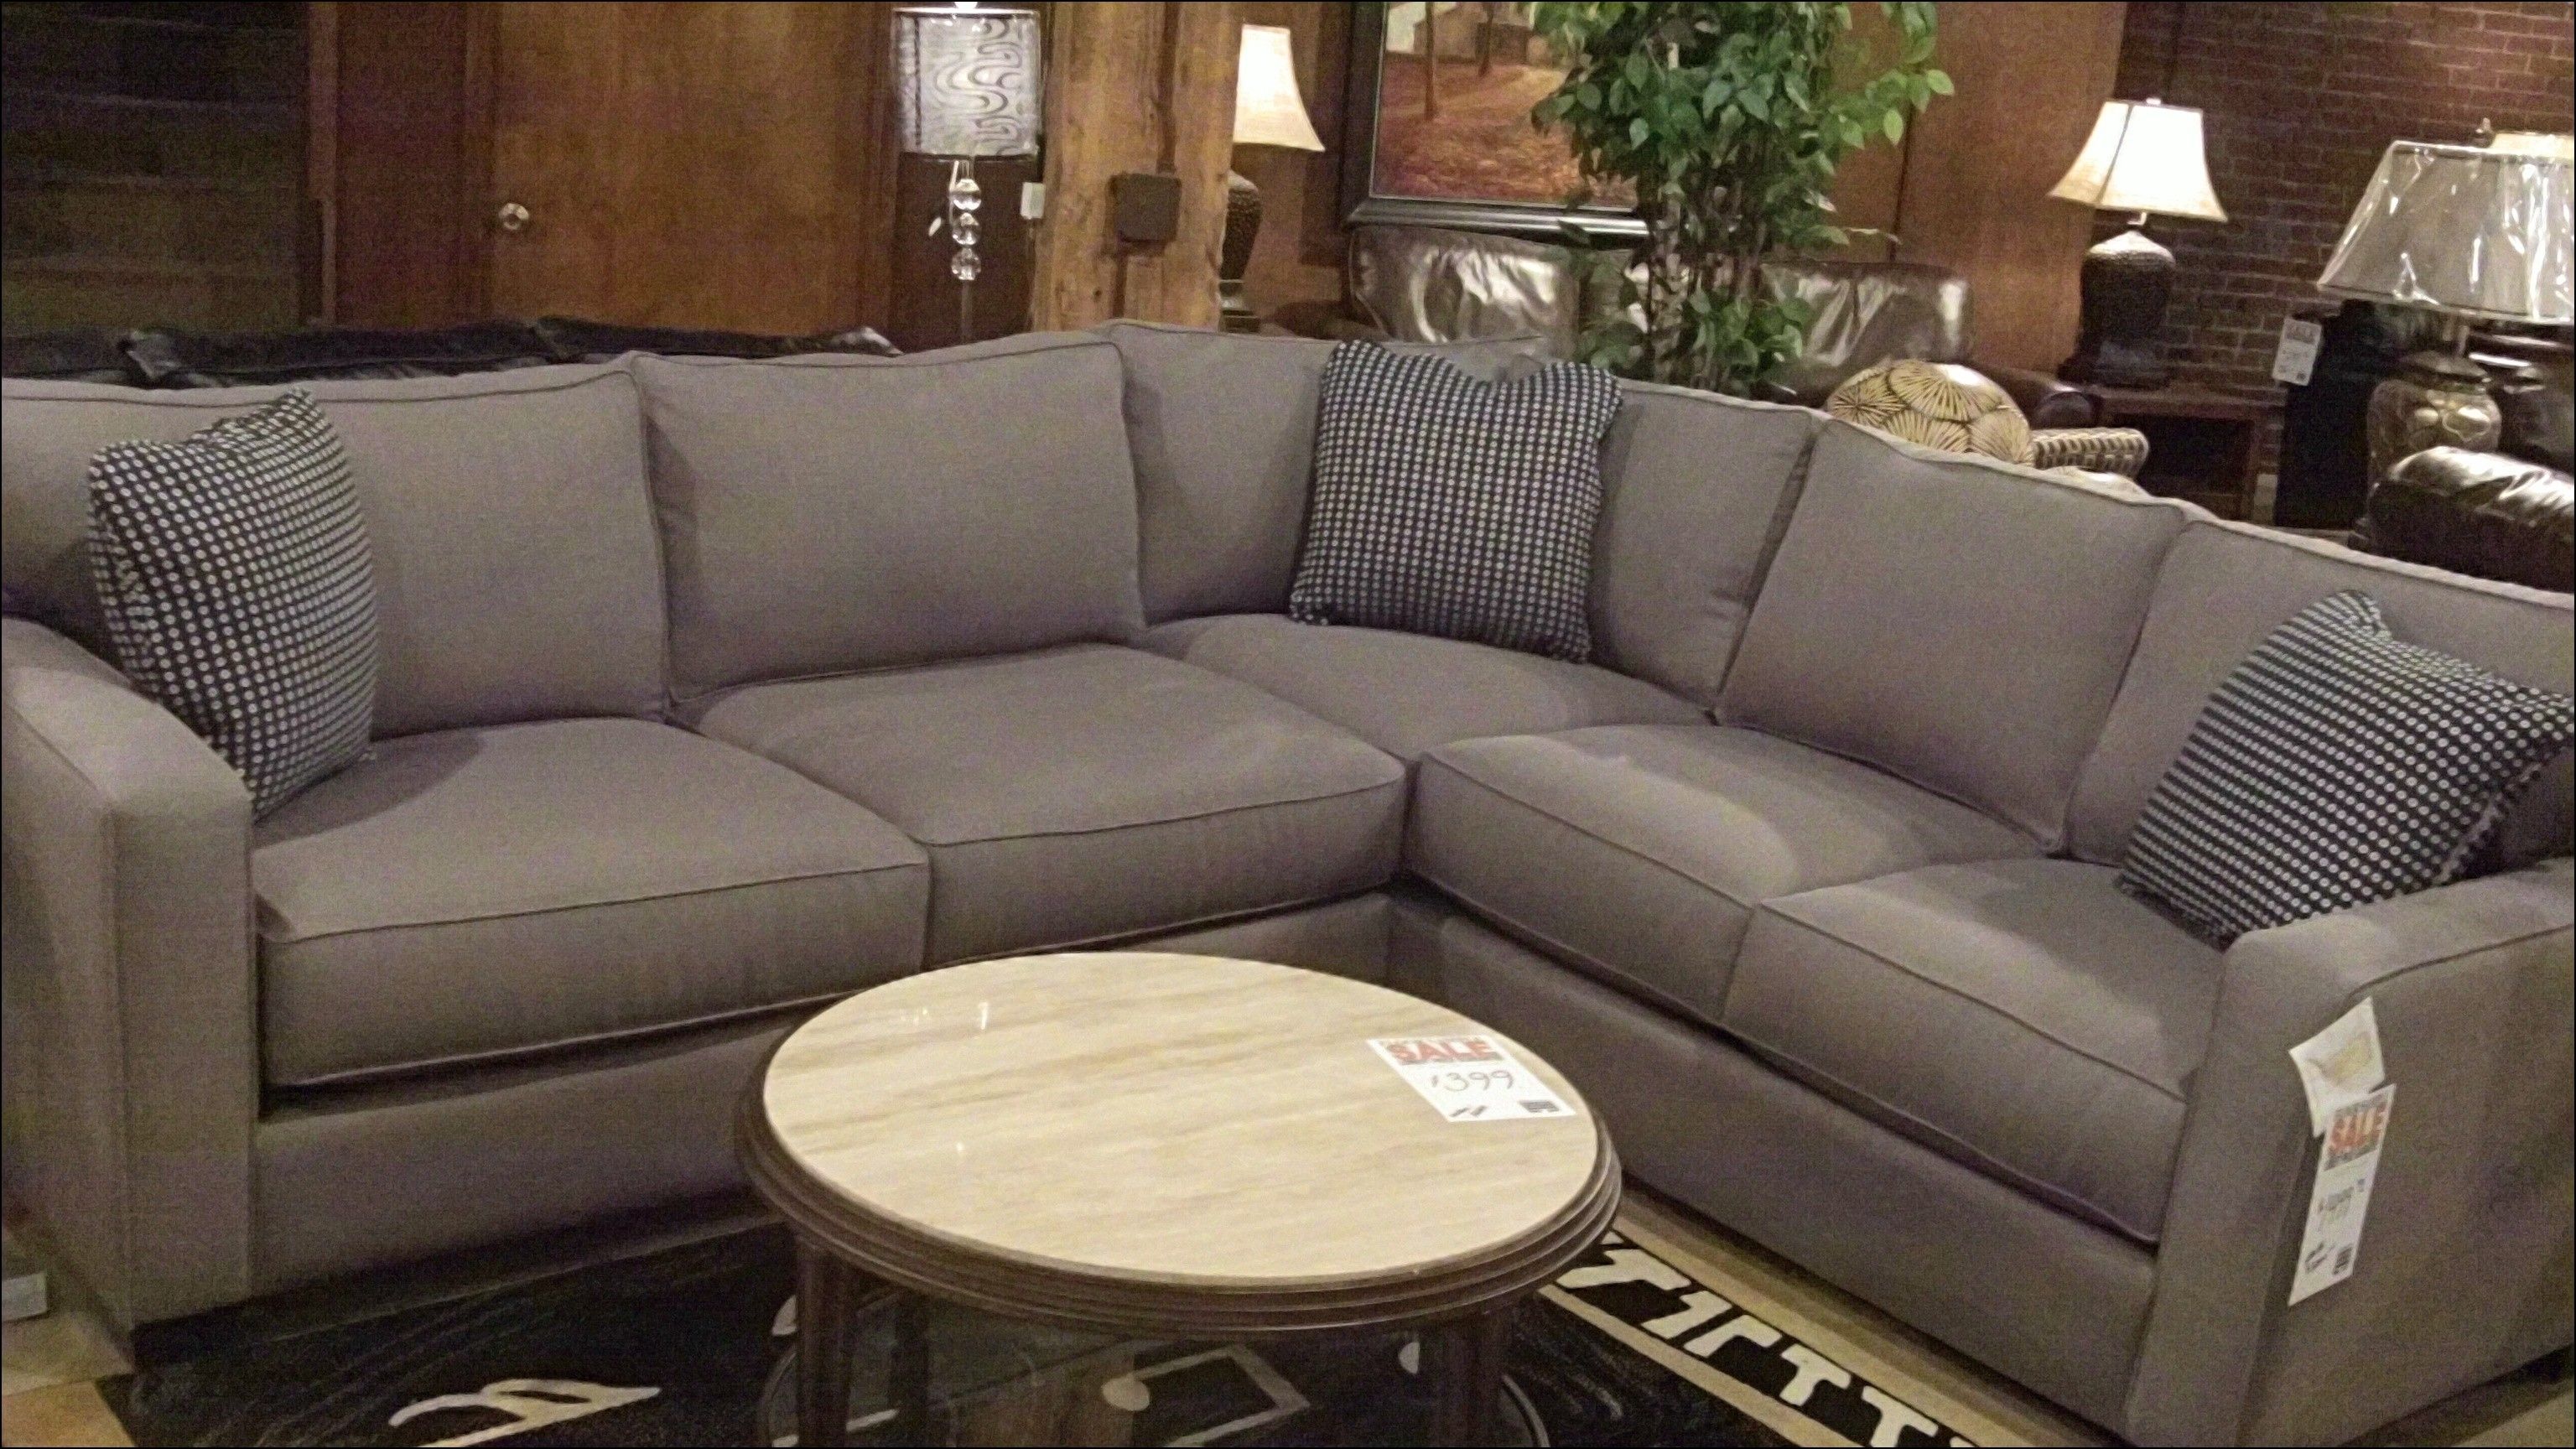 Stylish Sectional Sofas Tulsa Ok – Buildsimplehome In Tulsa Sectional Sofas (Photo 2 of 10)